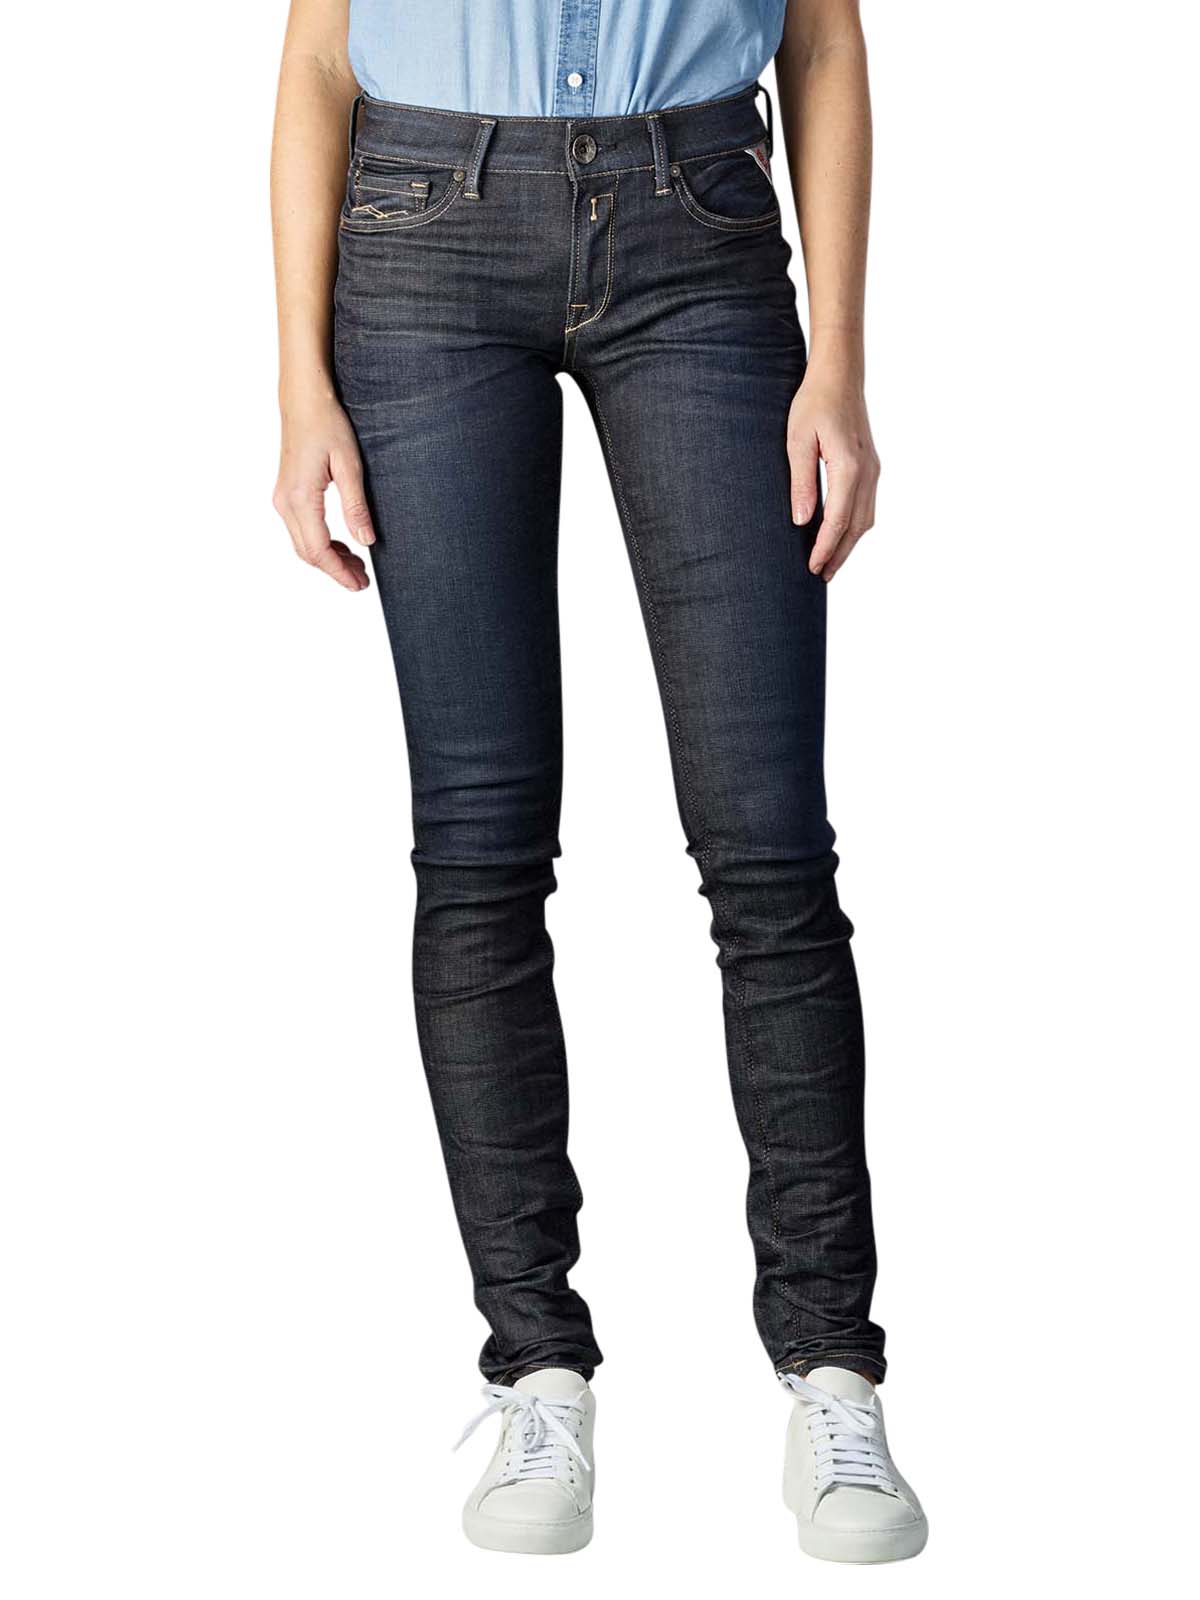 Drink water Uitlijnen drempel Replay Luz Jeans Skinny Hyperflex Stretch washed blue Replay Women's Jeans  | Free Shipping on BEBASIC.CH - SIMPLY LOOK GOOD